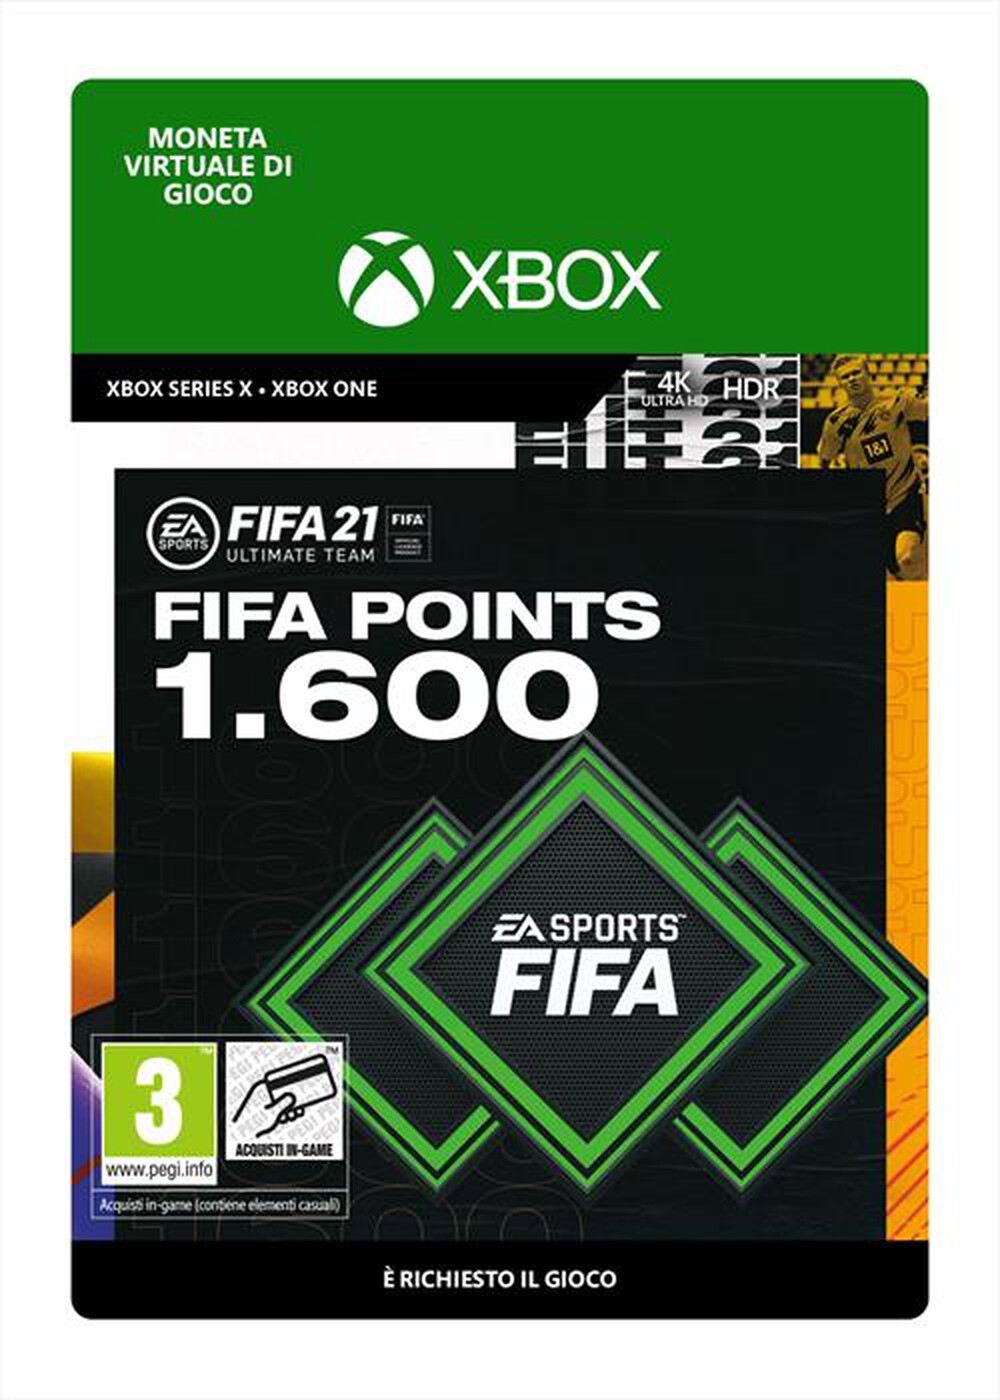 "MICROSOFT - FIFA 21 Ultimate Team 1600 Points"